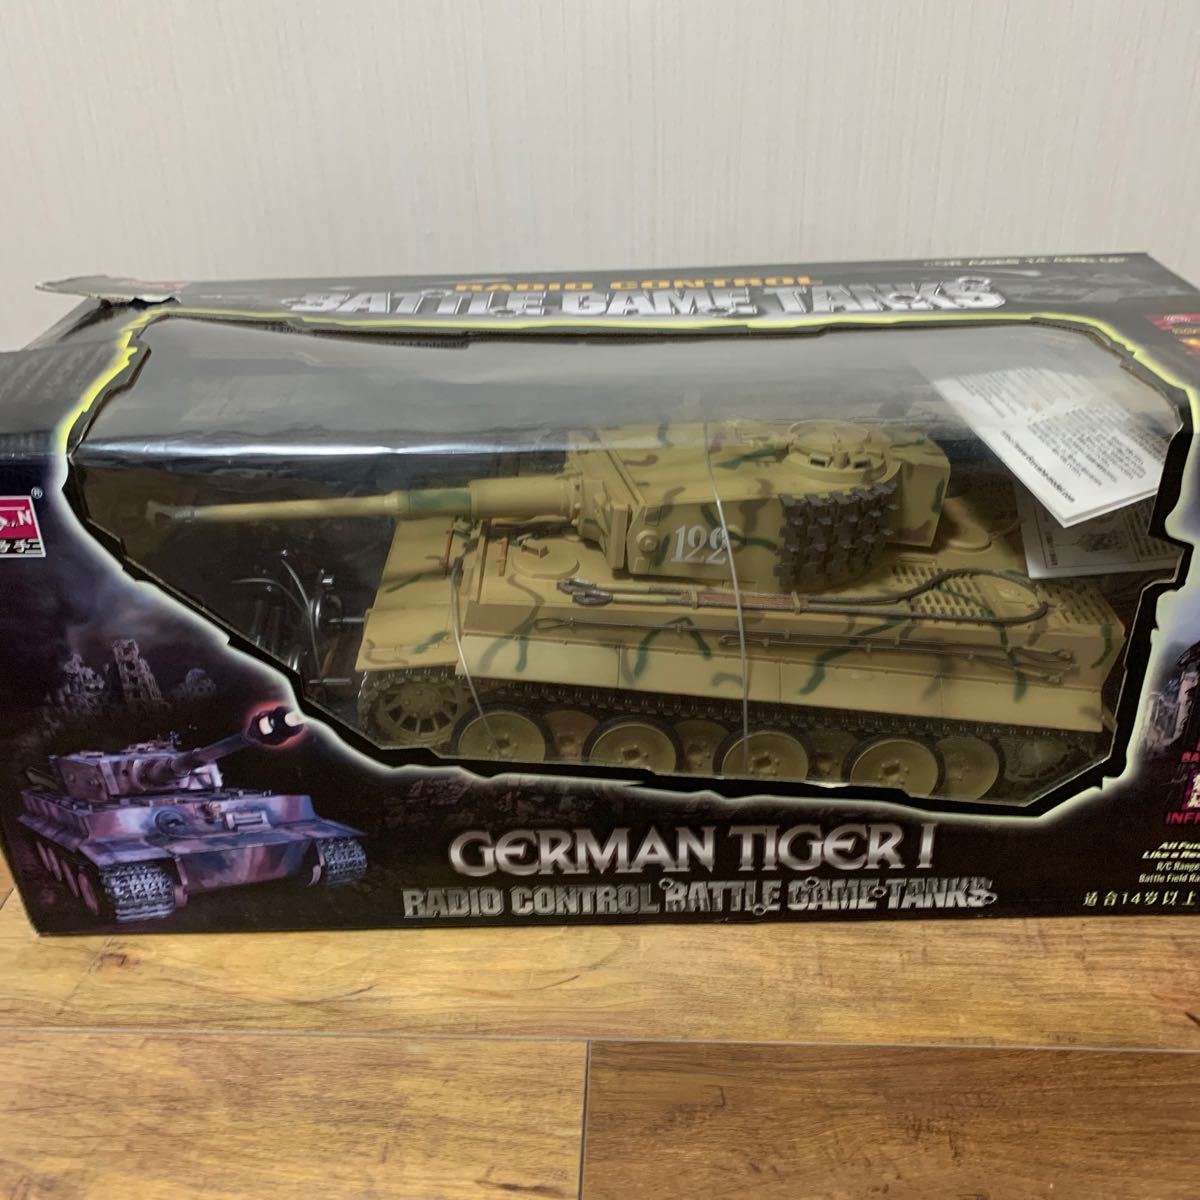  small number hand GERMAN TIGER Ⅰ radio-controller 1:16 unused box damage tank radio-controller RADIO CONTROL BATTLE GAME TANKS 2.4GHz